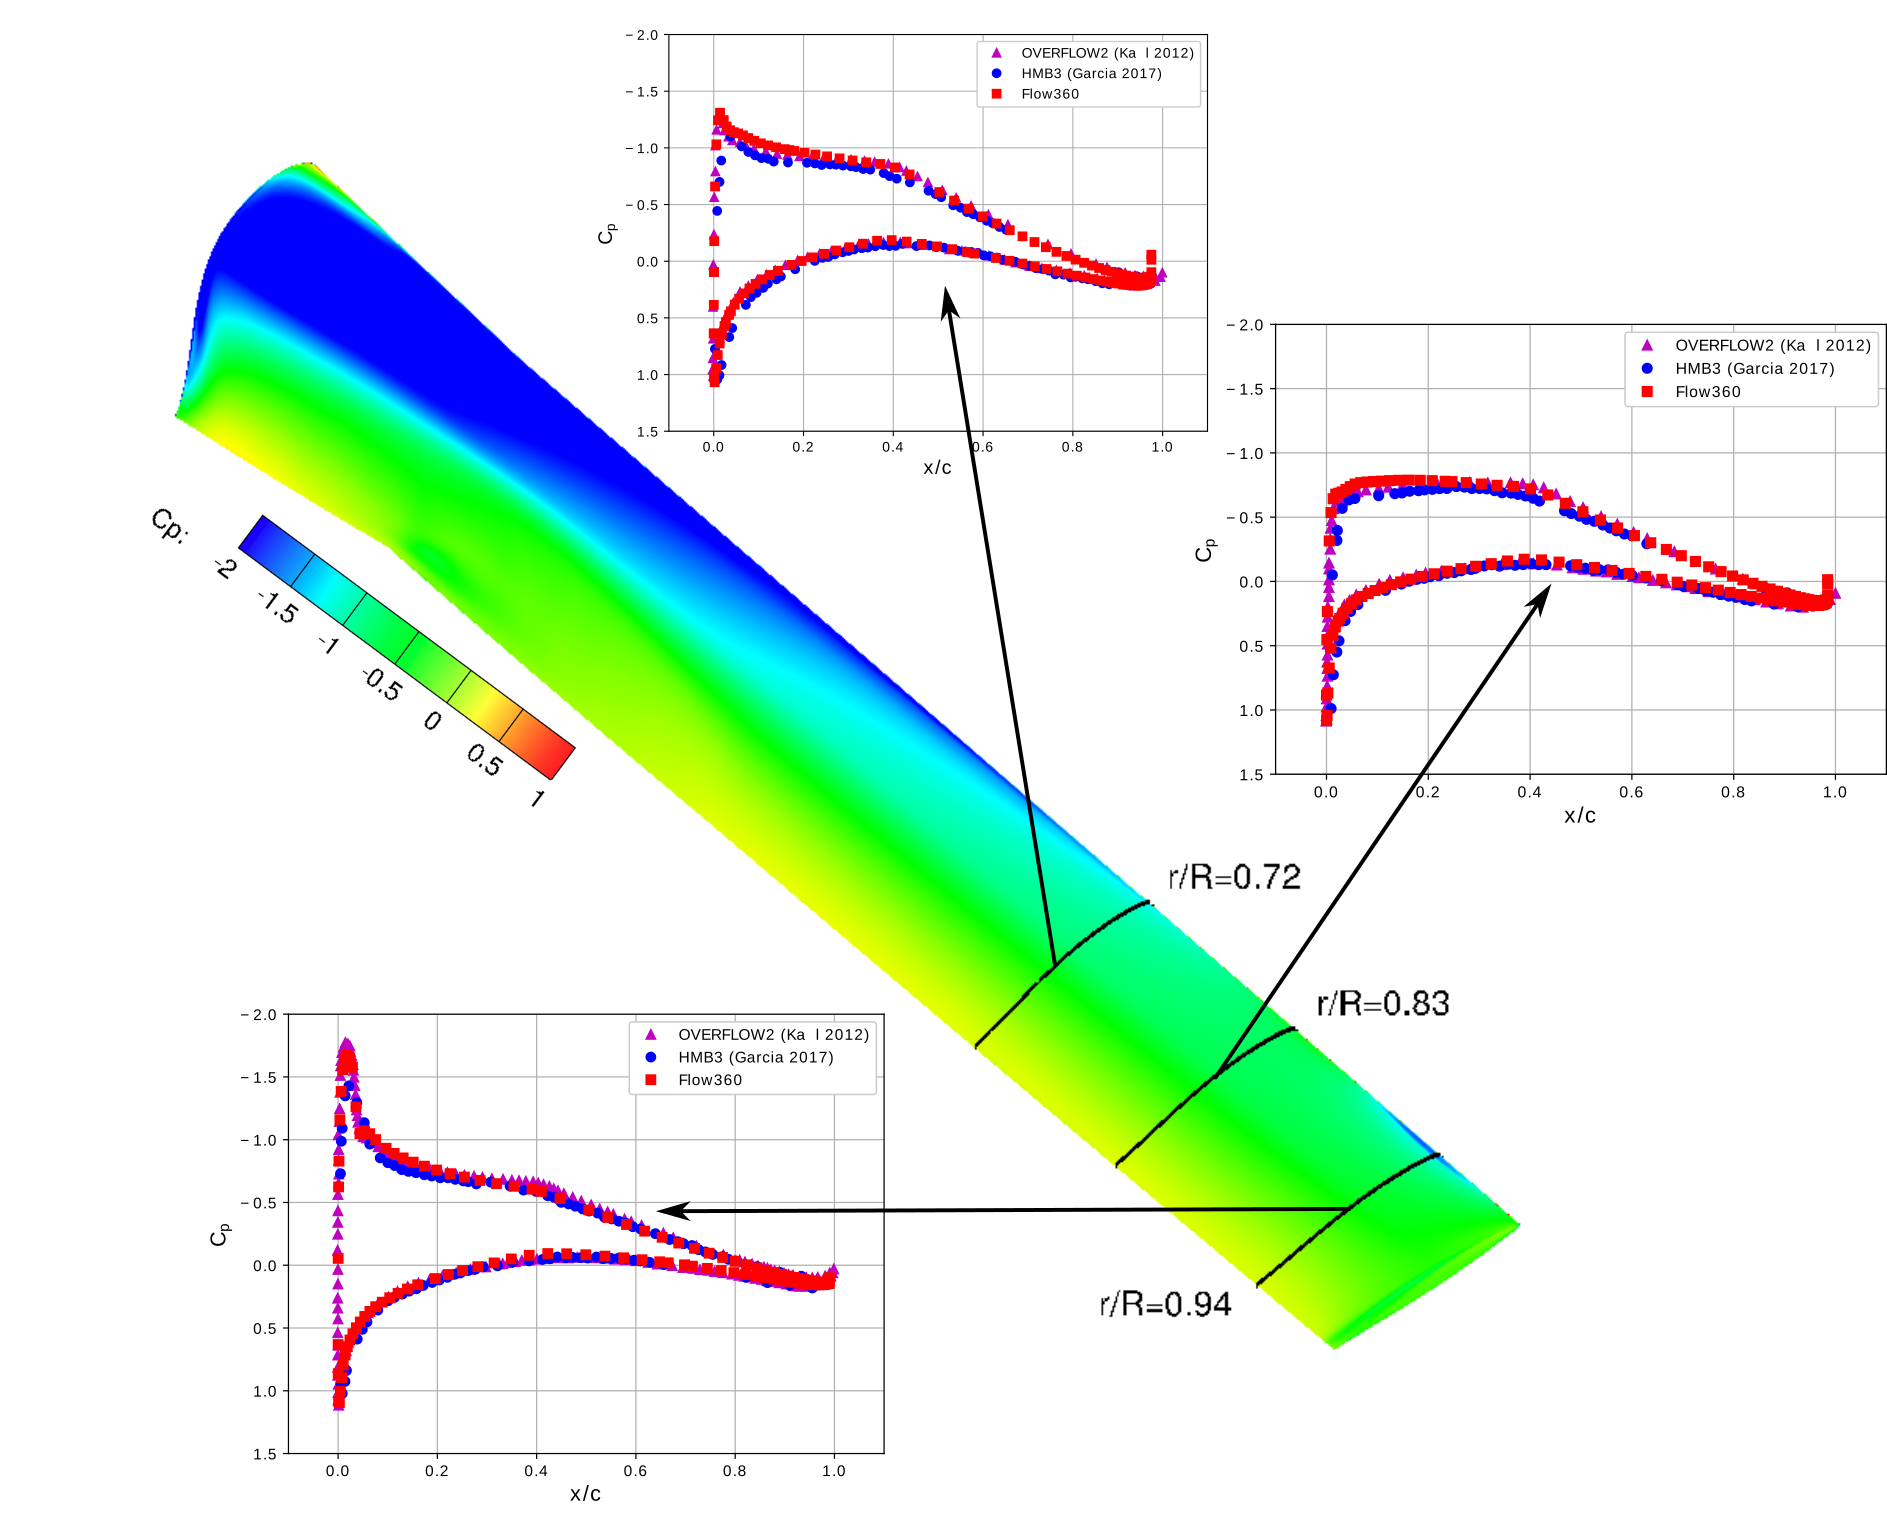 Predicted surface pressure coefficient at a collective pitch angle of 10